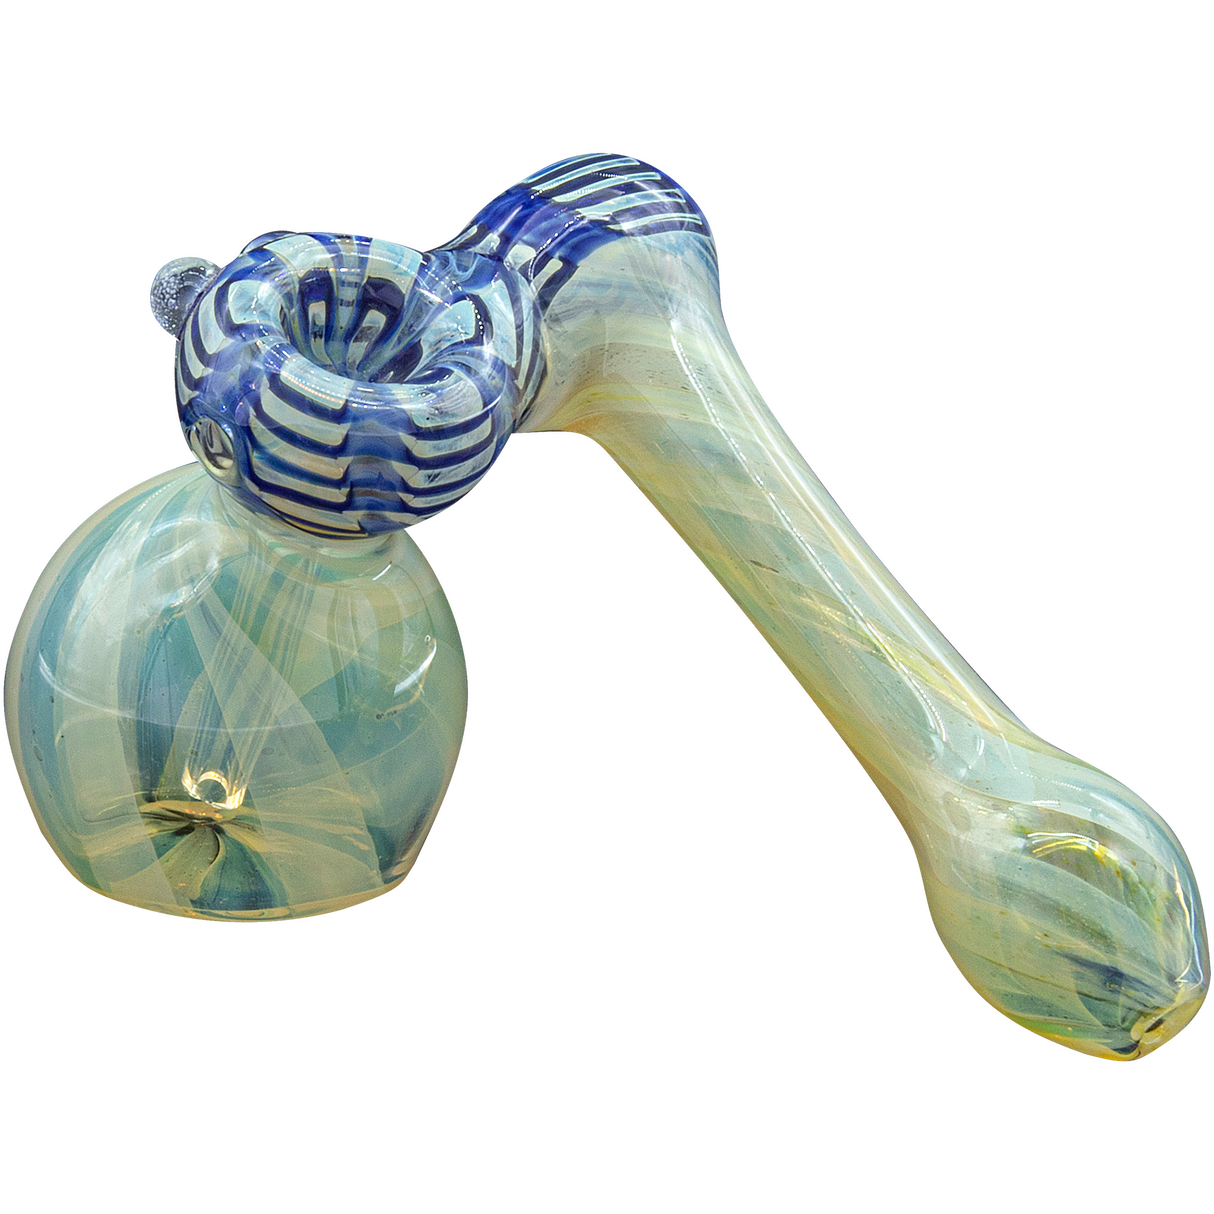 LA Pipes Raked Sidecar Bubbler Pipe in Cobalt Blue, 6" Borosilicate Glass for Dry Herbs, Side View